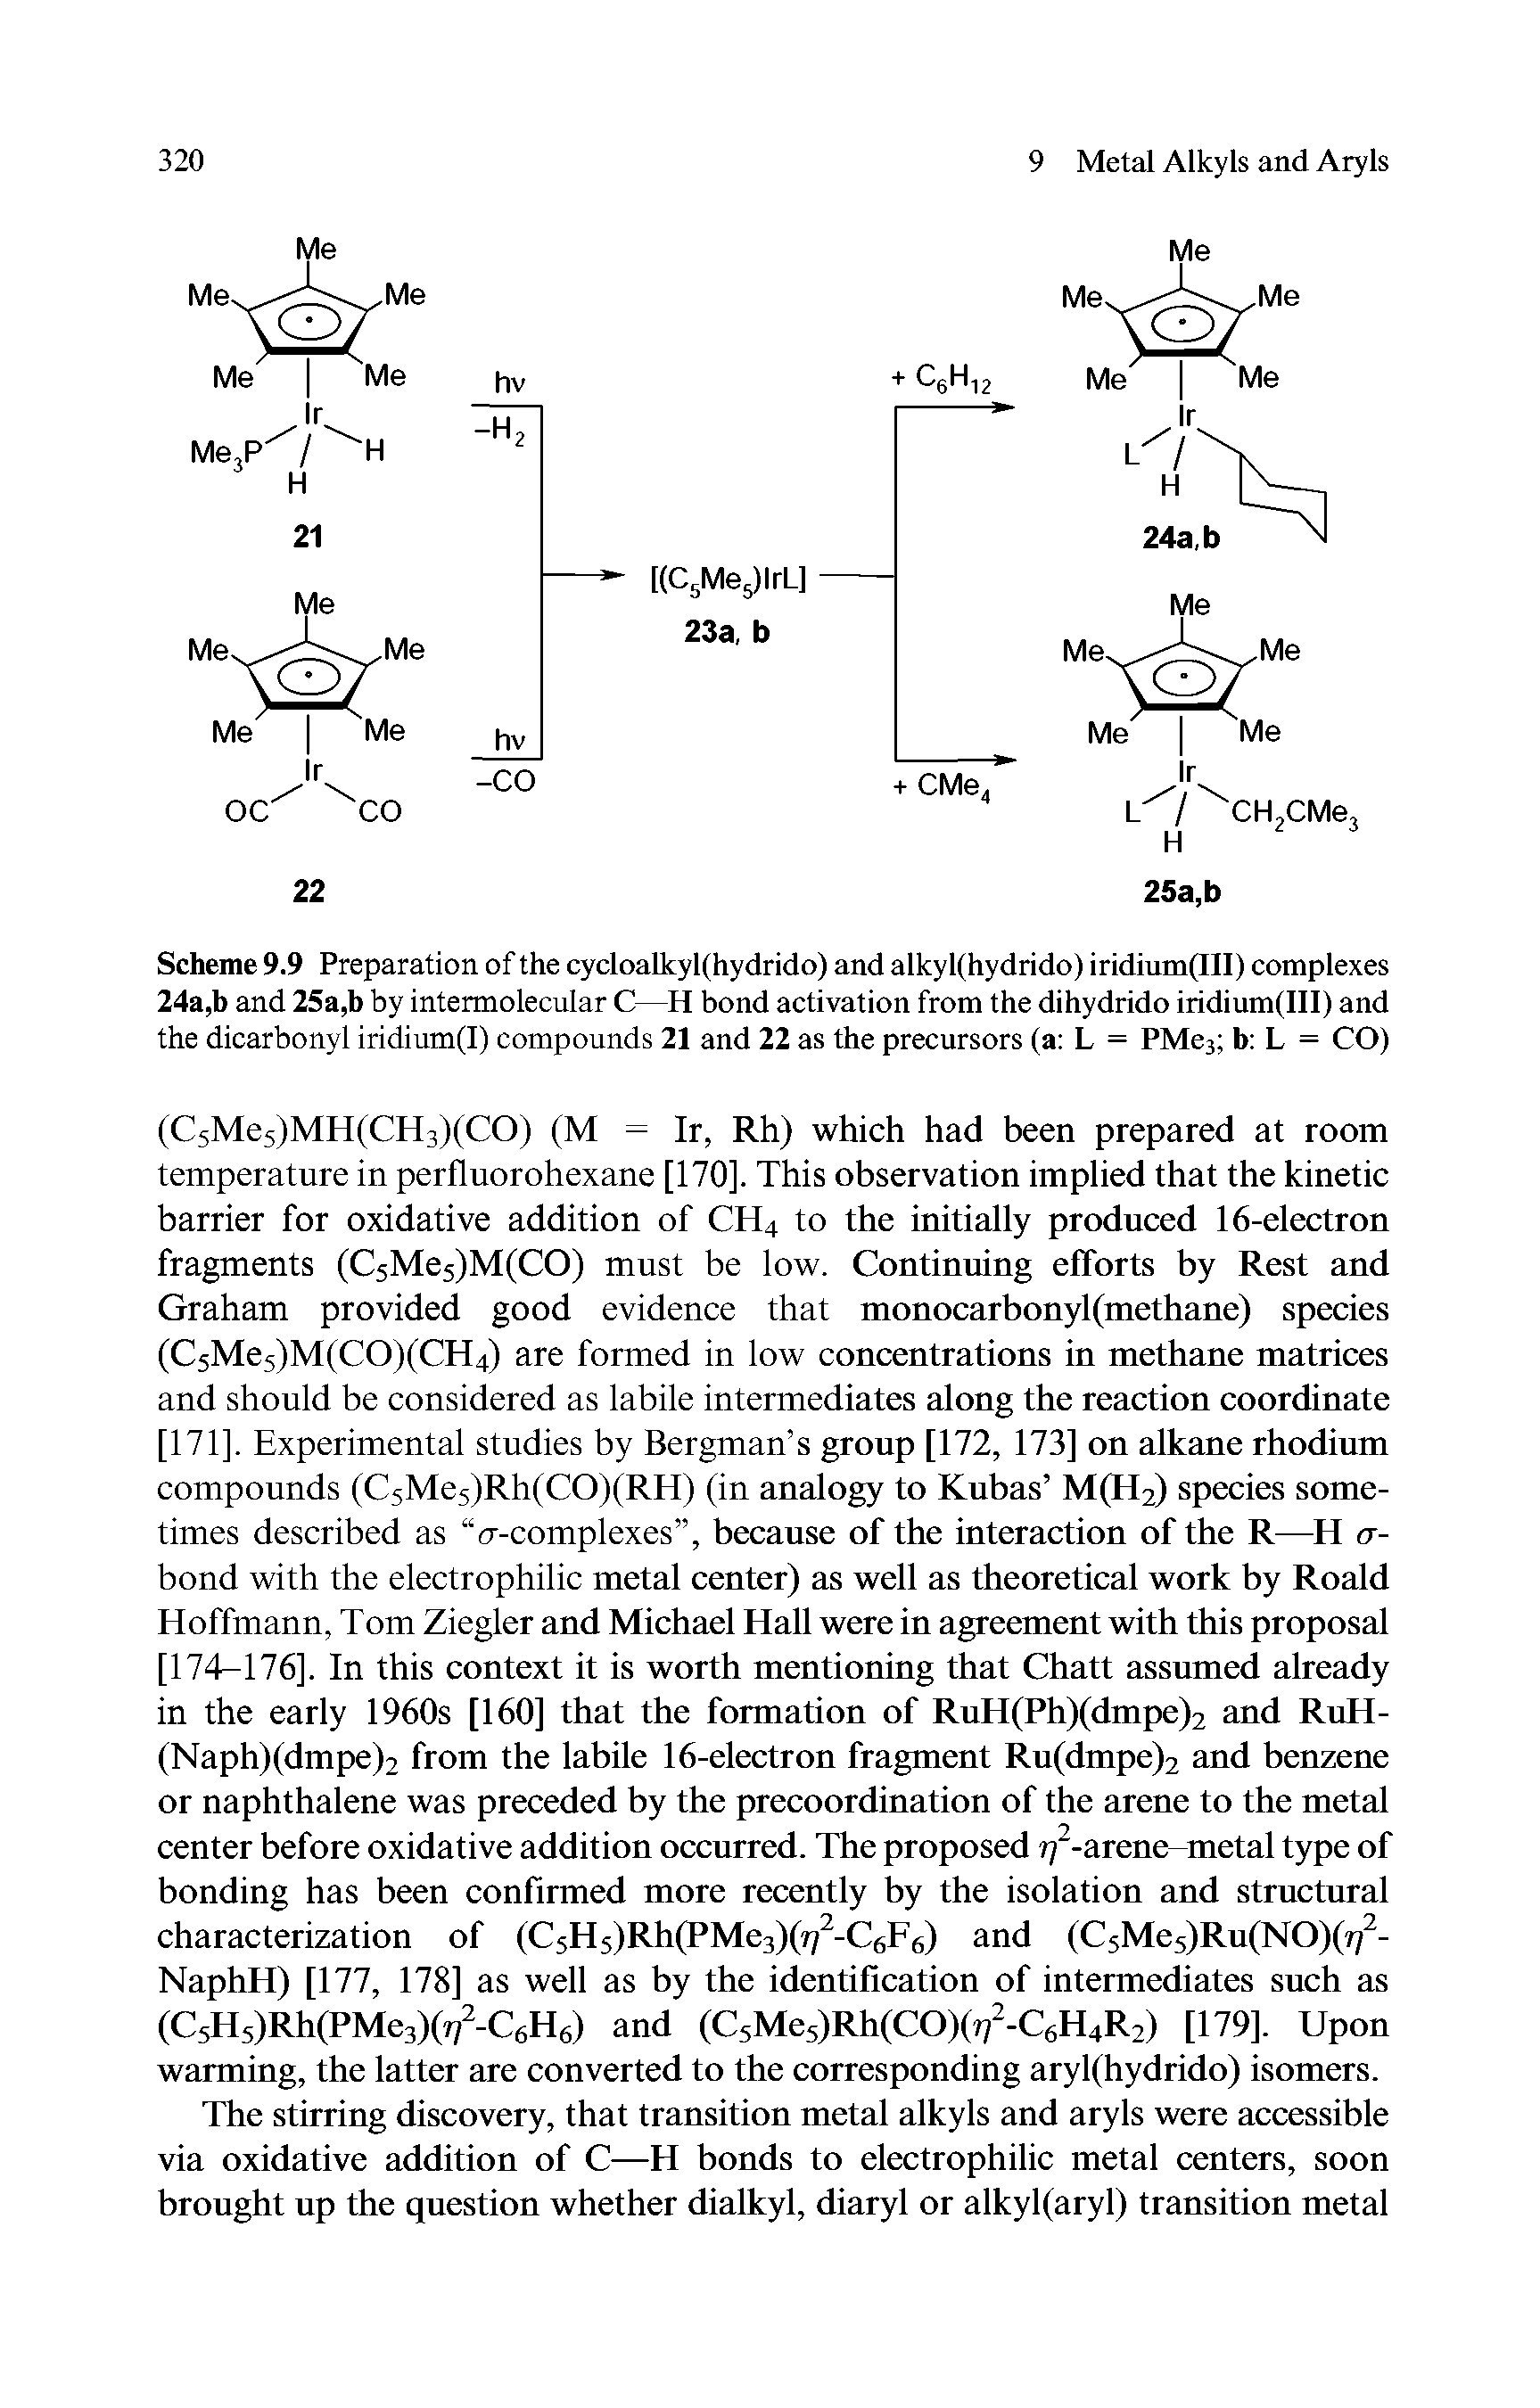 Scheme 9.9 Preparation of the cycloalkyl(hydrido) and alkyl(hydrido) iridium(III) complexes 24a,b and 25a,b by intermolecular C—H bond activation from the dihydrido iridium(III) and the dicarbonyl iridium(I) compounds 21 and 22 as the precursors (a L = PMe3 b L = CO)...